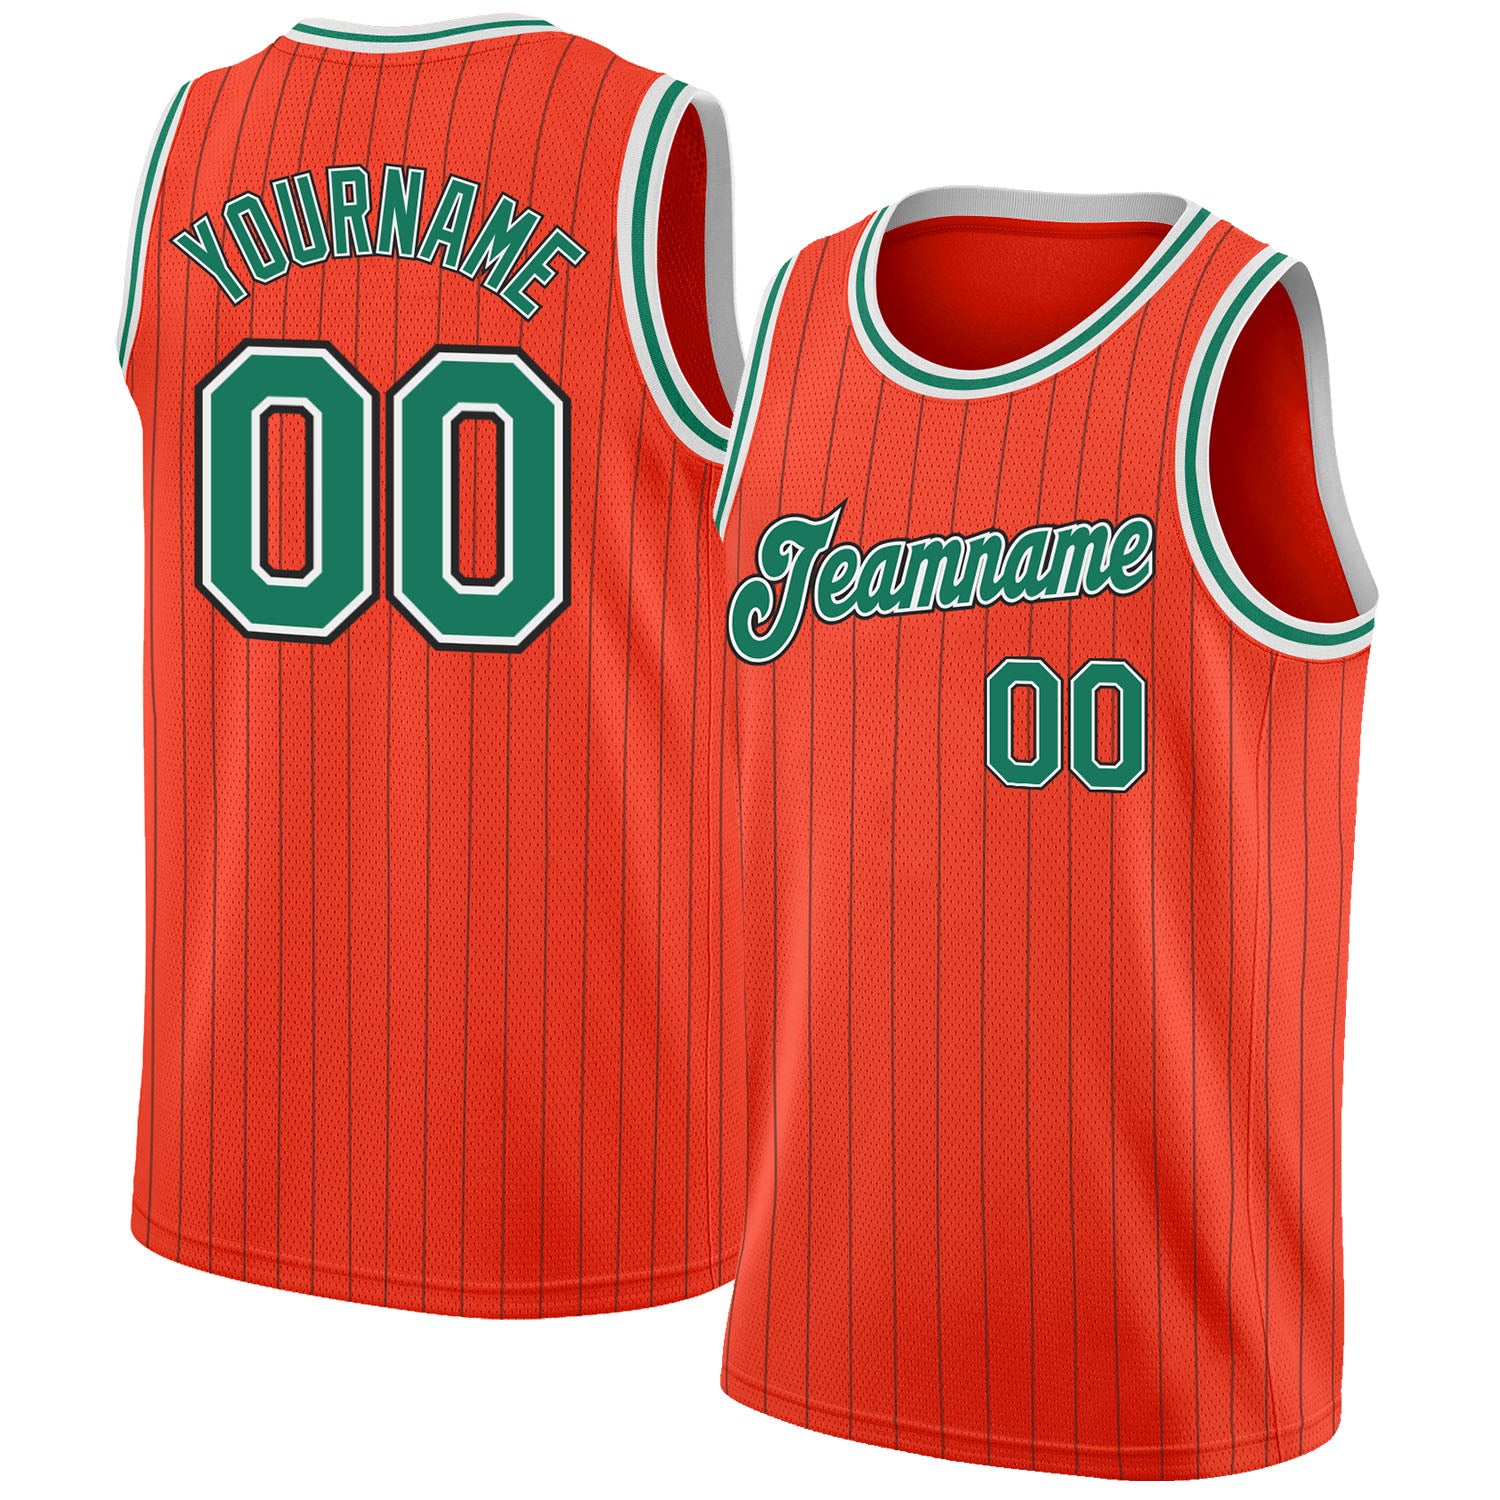 Custom White Basketball Jersey Kelly Green-Red 3D Mexico Splashes Authentic  - FansIdea